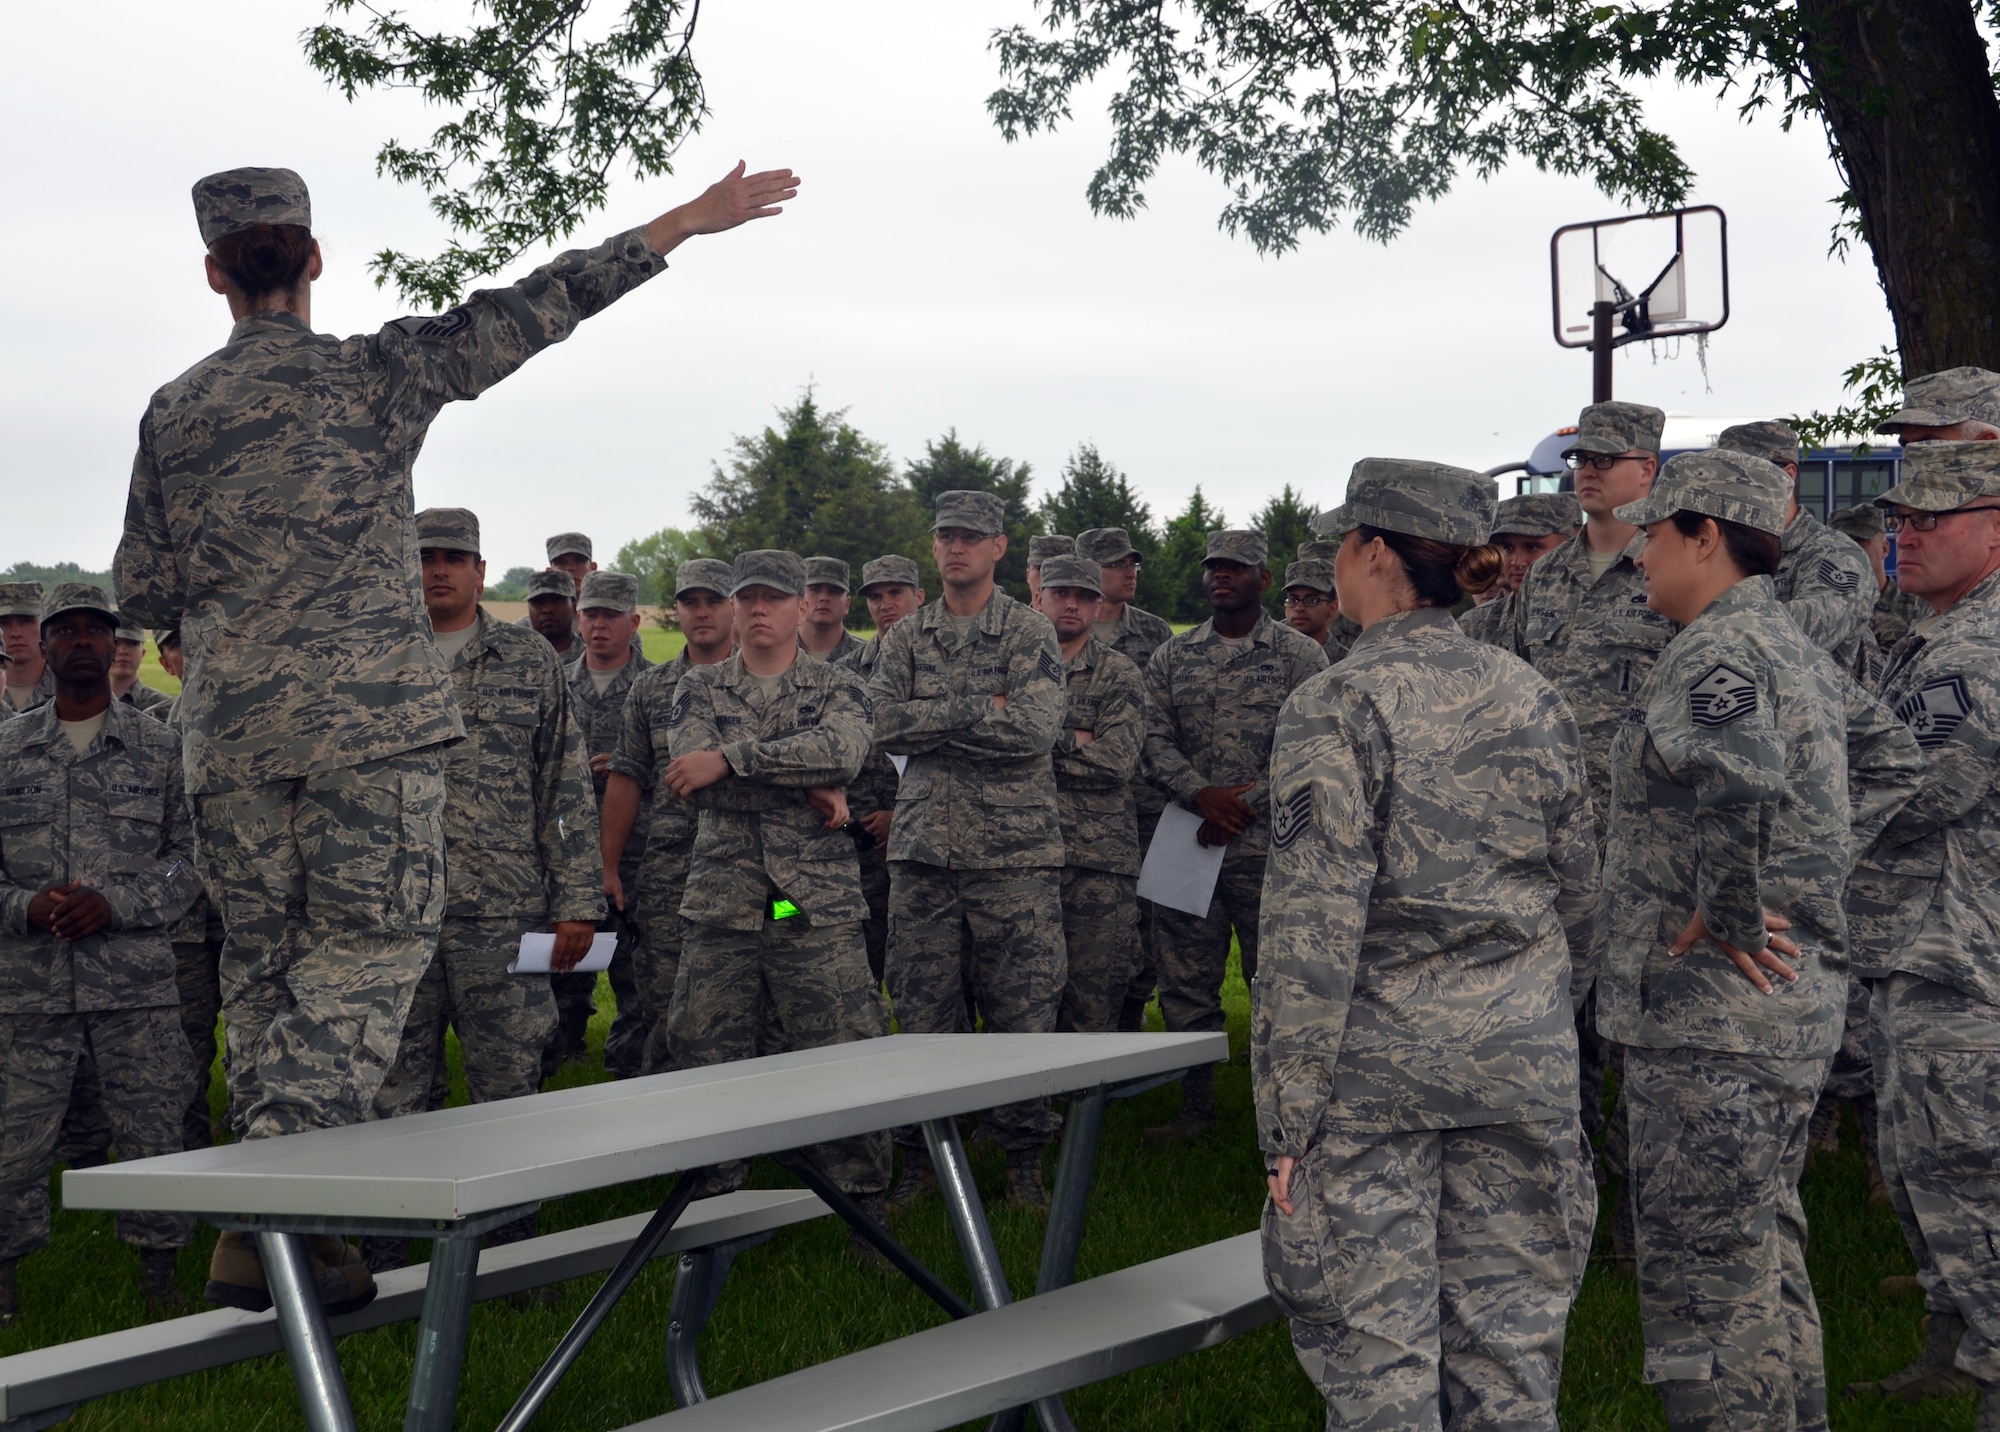 Newly-arrived 131st Bomb Wing Citizen-Airmen receive a welcome brief at Camp Clark, Mo., June 2, 2015.  Members trained at Camp Clark for state emergency response.  (U.S. Air National Guard photo by Tech. Sgt. Traci Payne)